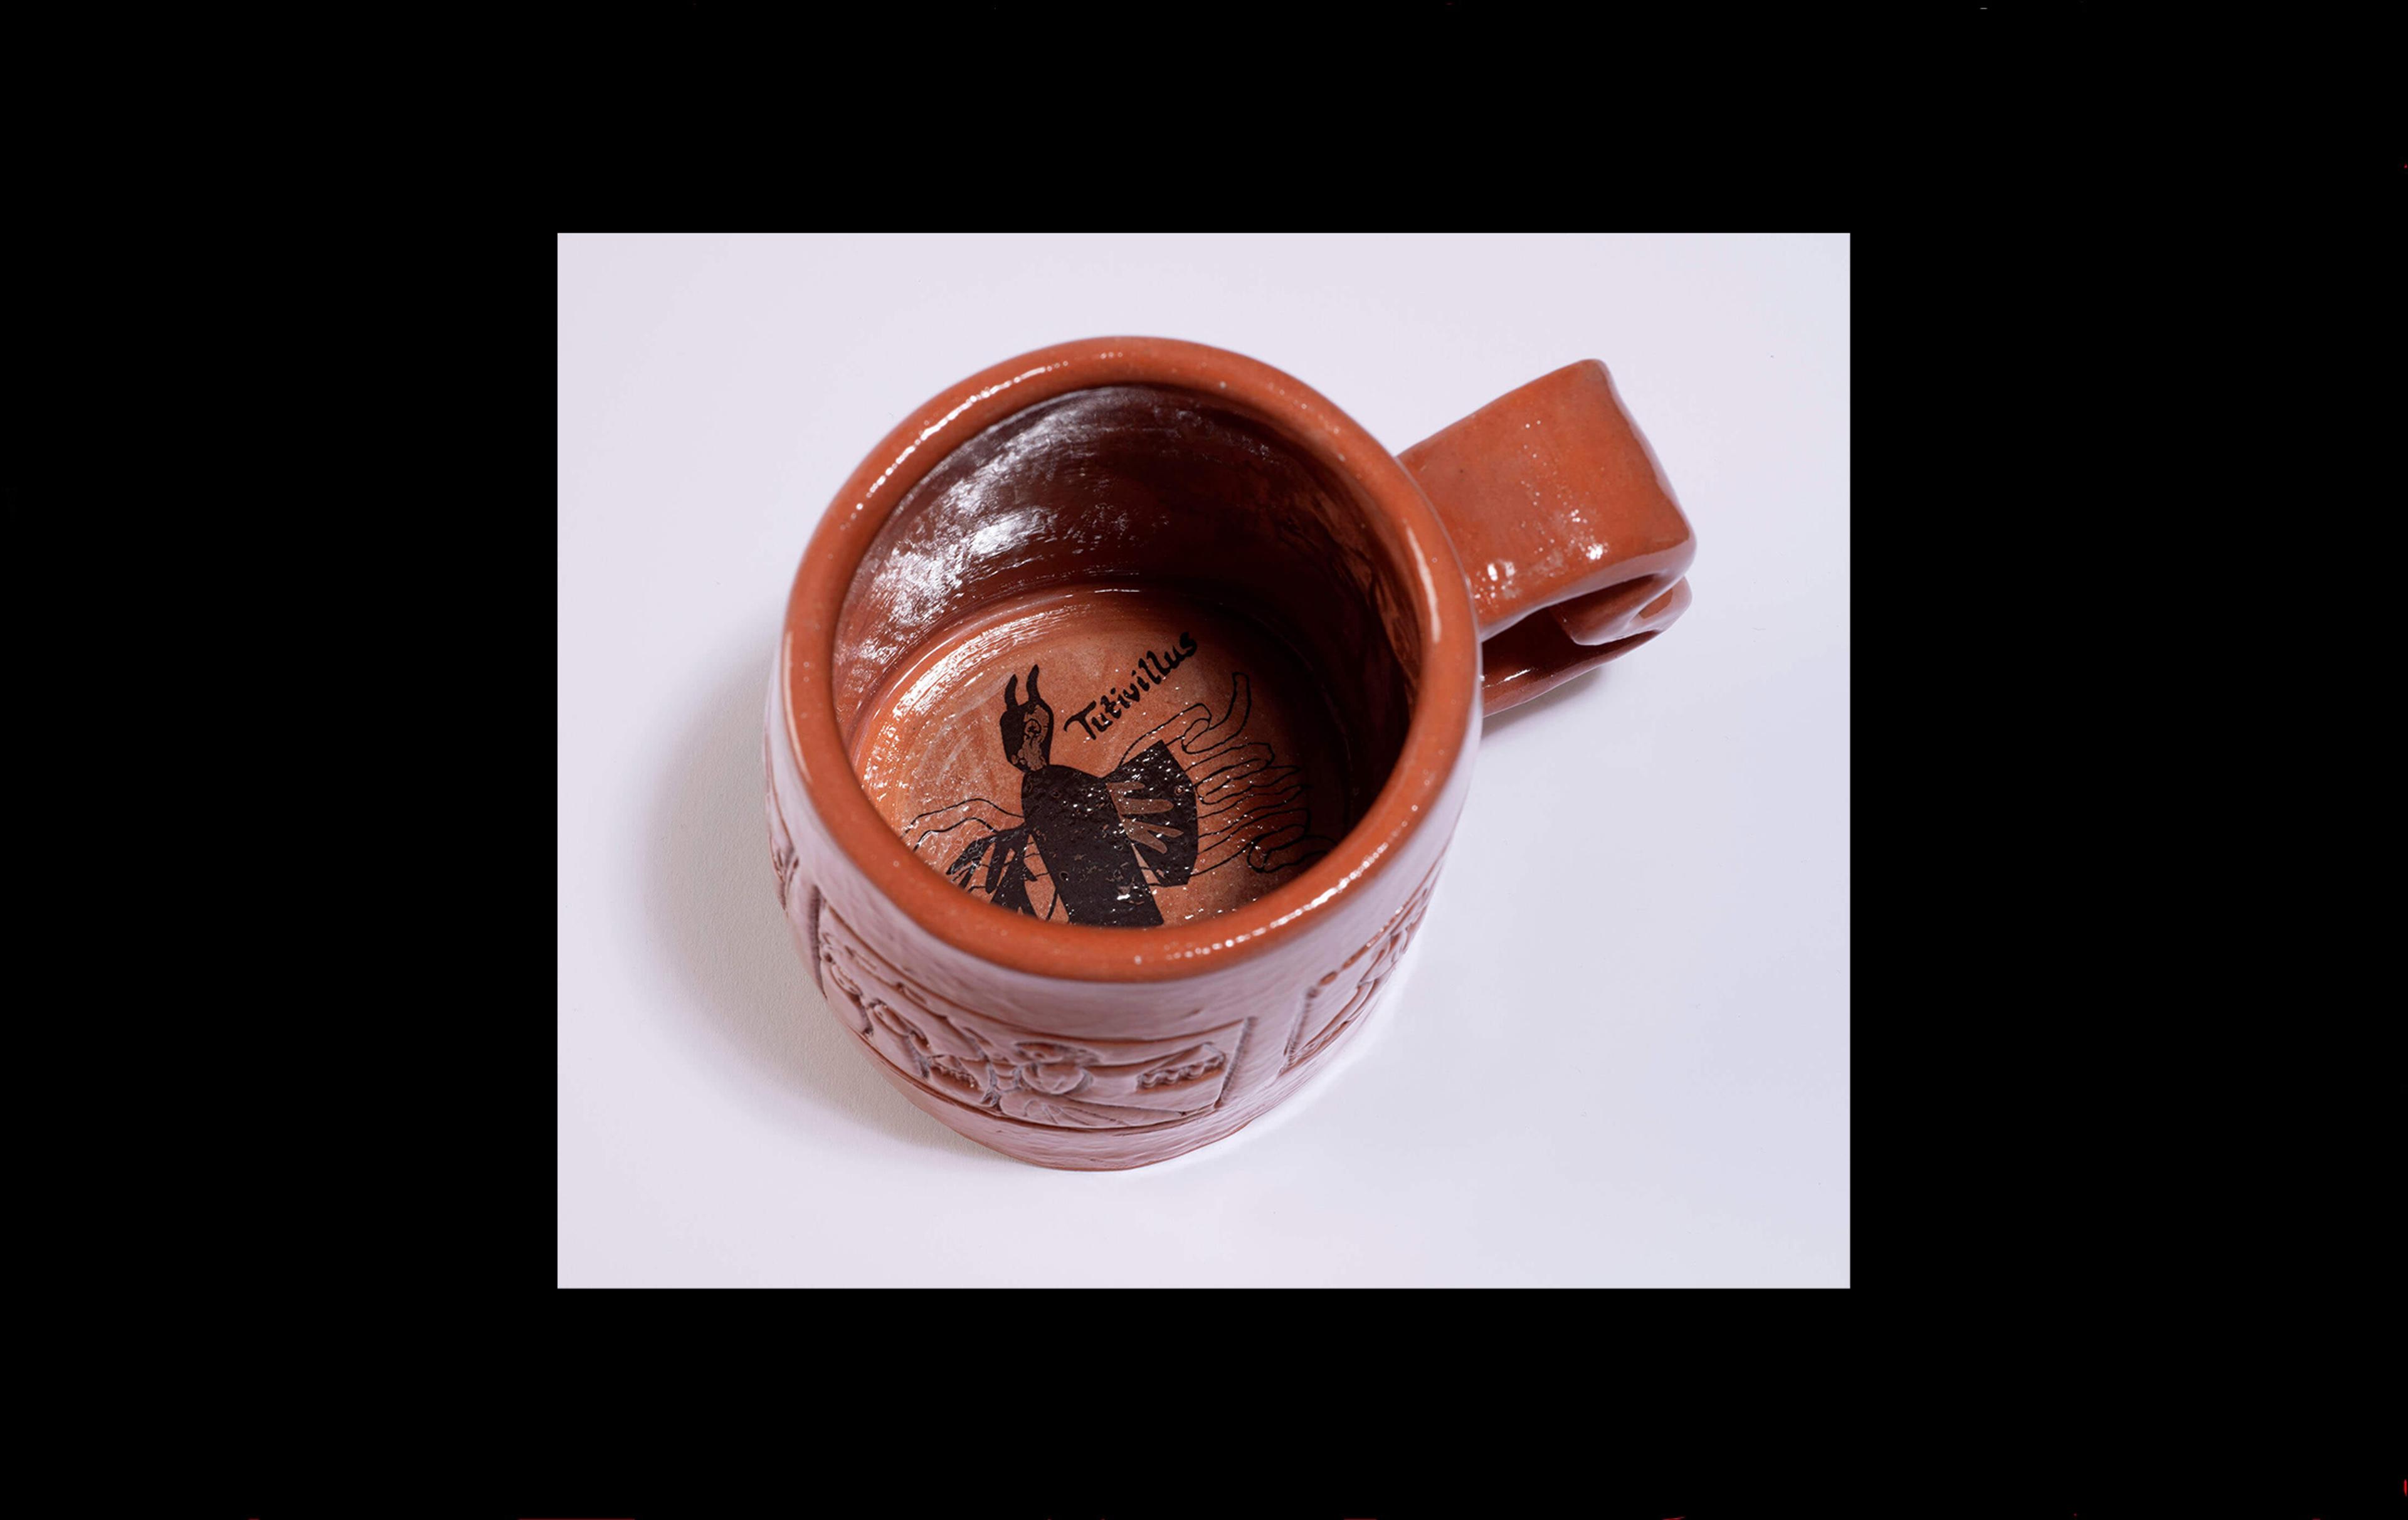 Photograph of red mug seen from above with a black image of a horned and winged figure inside 